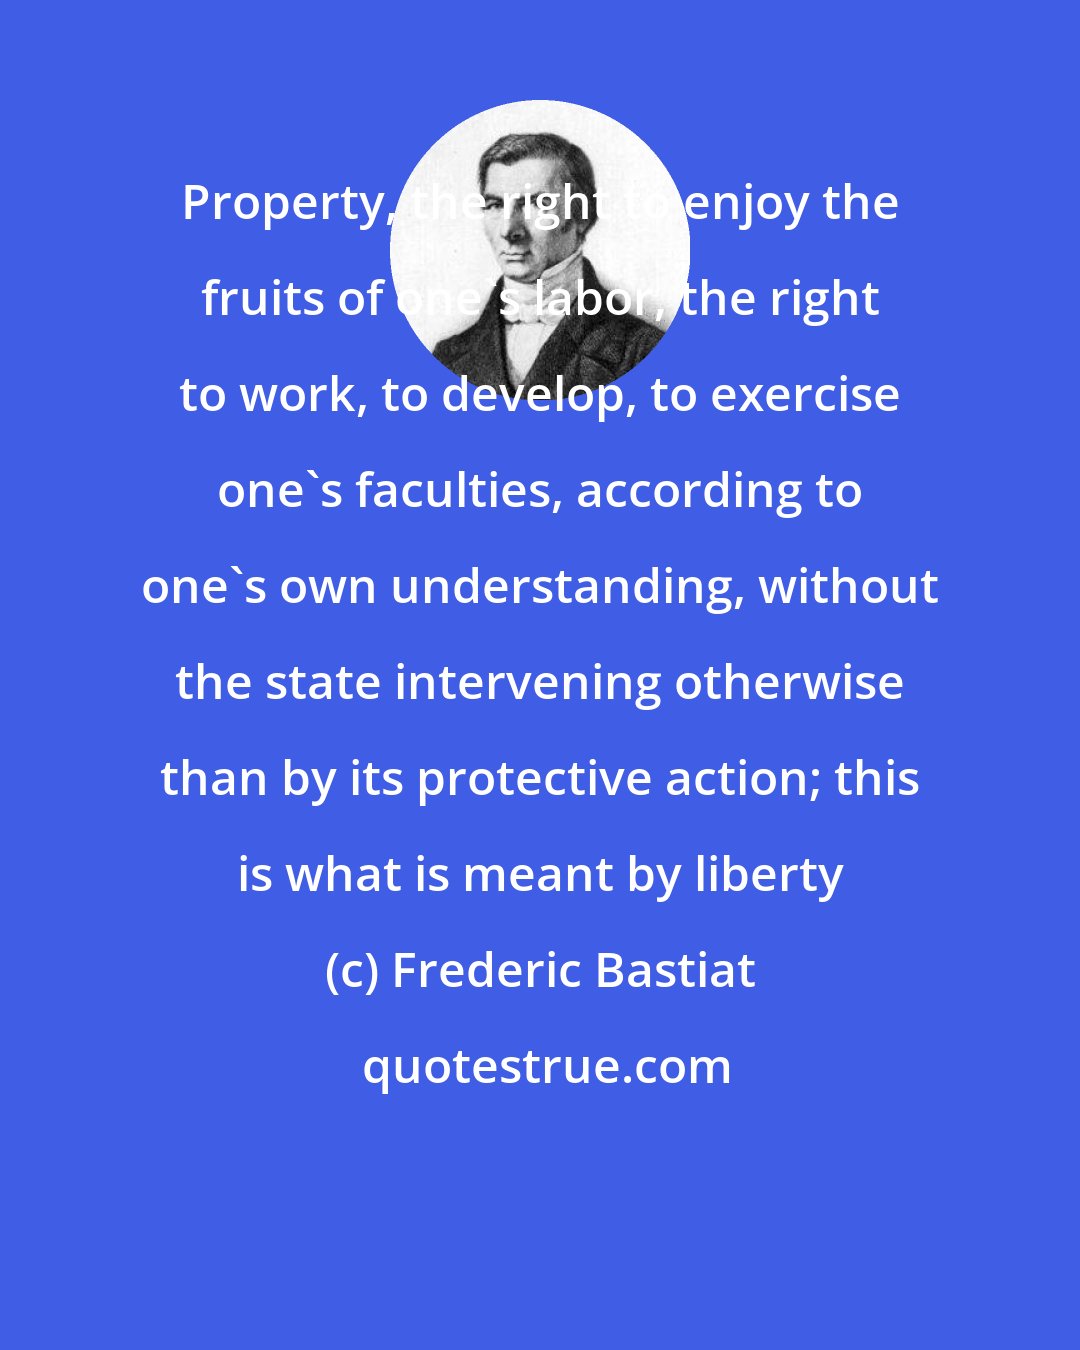 Frederic Bastiat: Property, the right to enjoy the fruits of one's labor, the right to work, to develop, to exercise one's faculties, according to one's own understanding, without the state intervening otherwise than by its protective action; this is what is meant by liberty